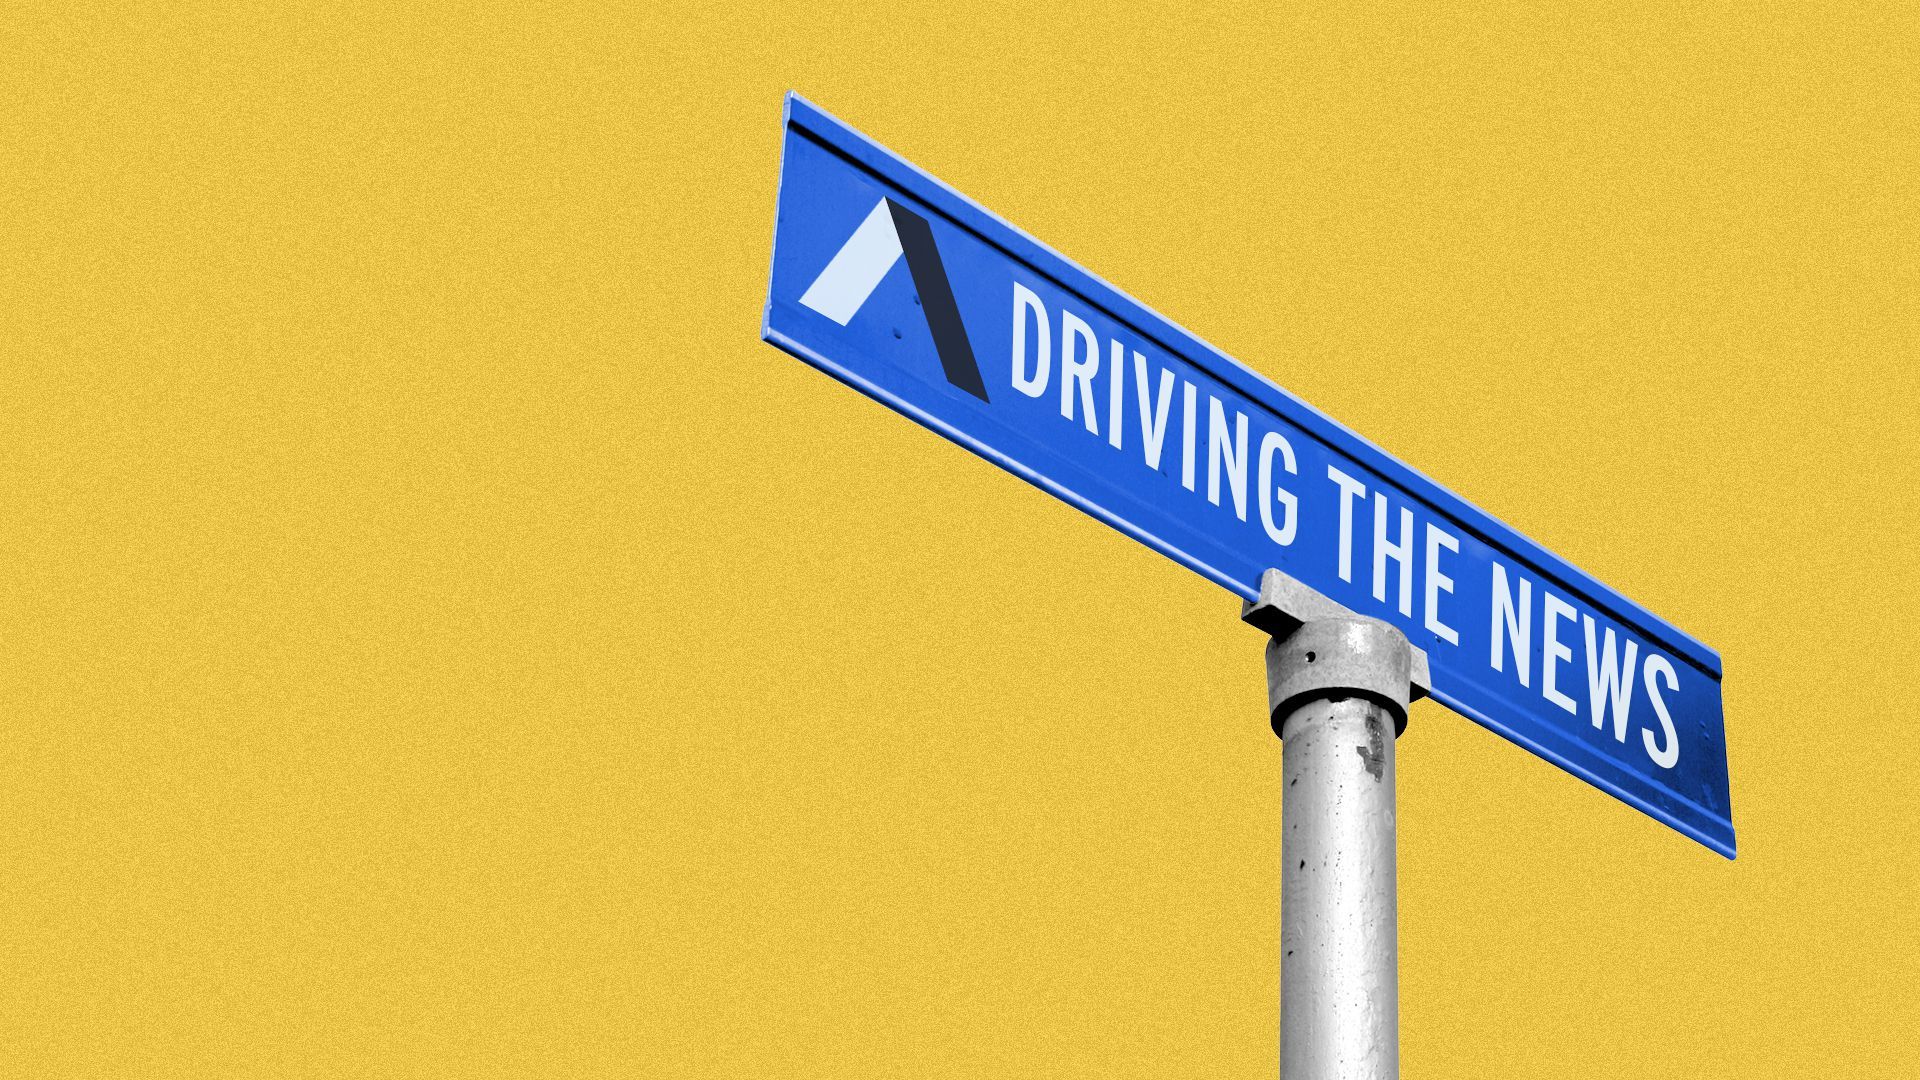 Illustration of a blue street sign that says Driving the News, featuring an Axios logo.